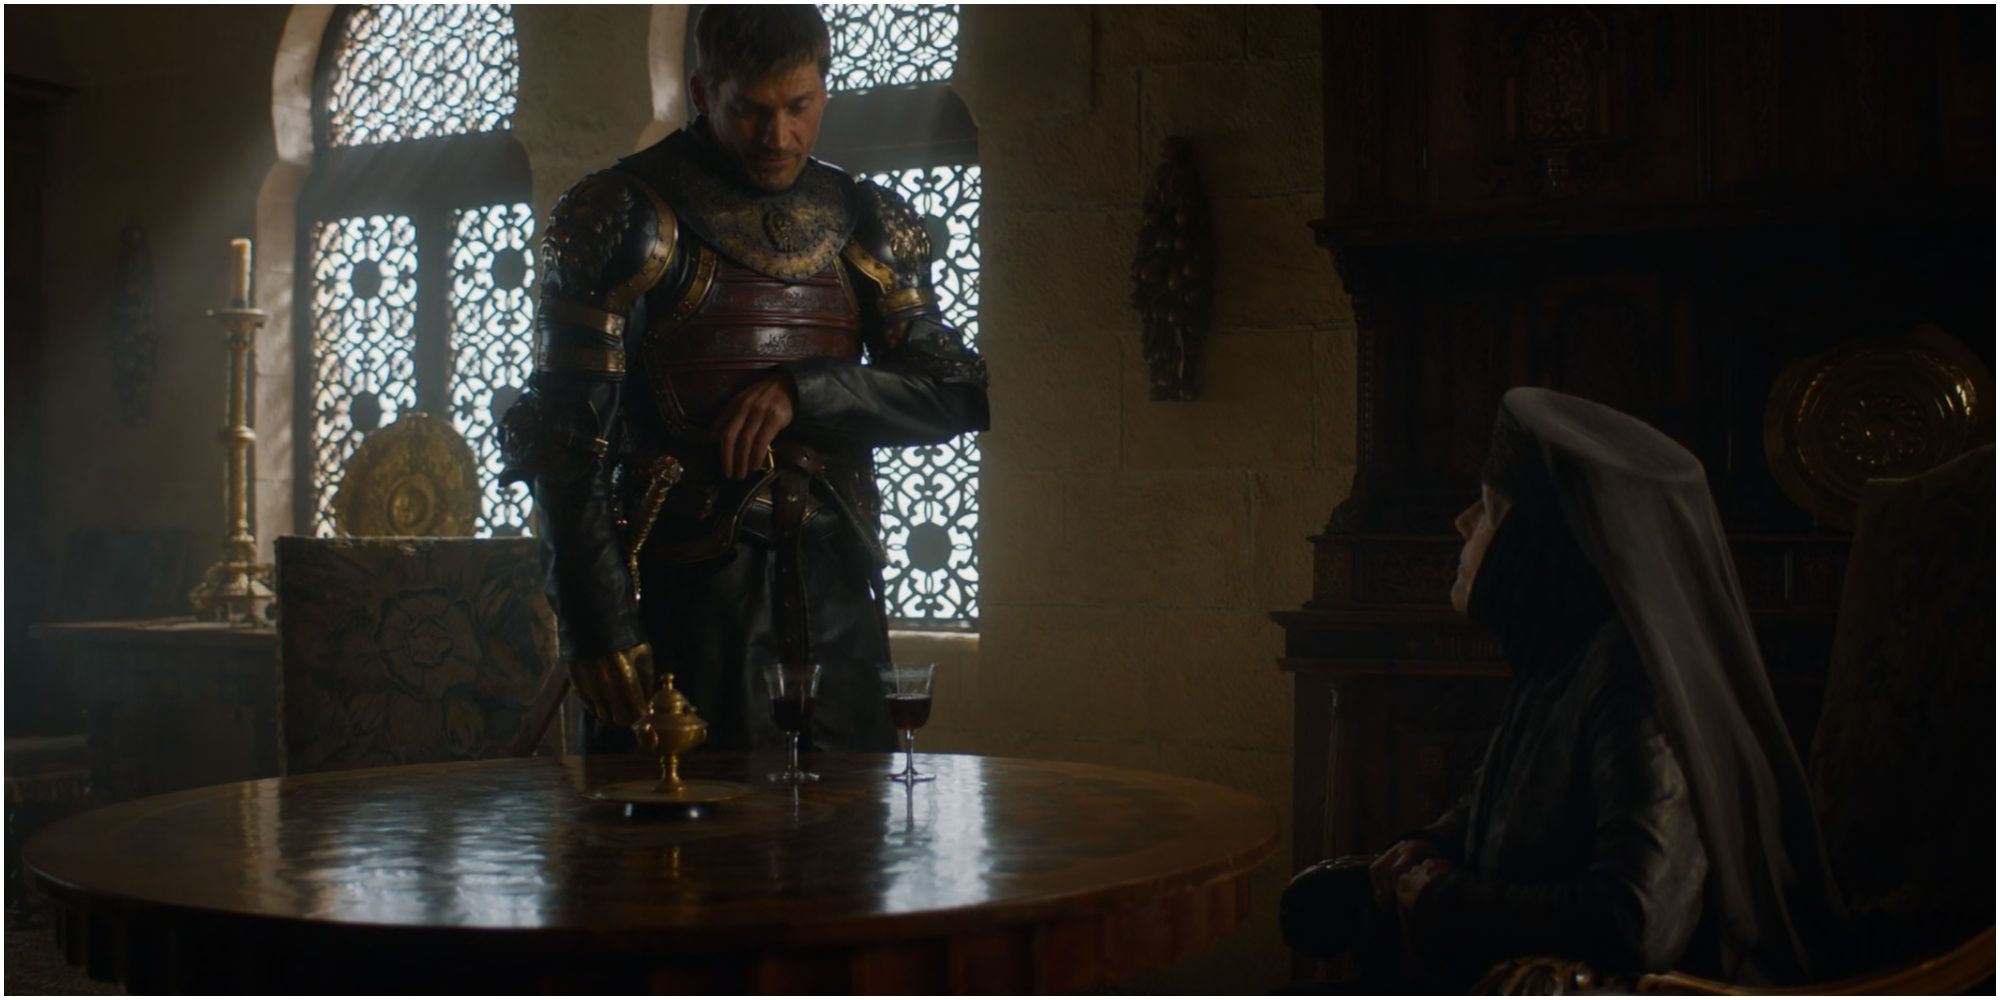 Olenna Tyrell notices Jaime Lannister's Widow's Wail in Game of Thrones.